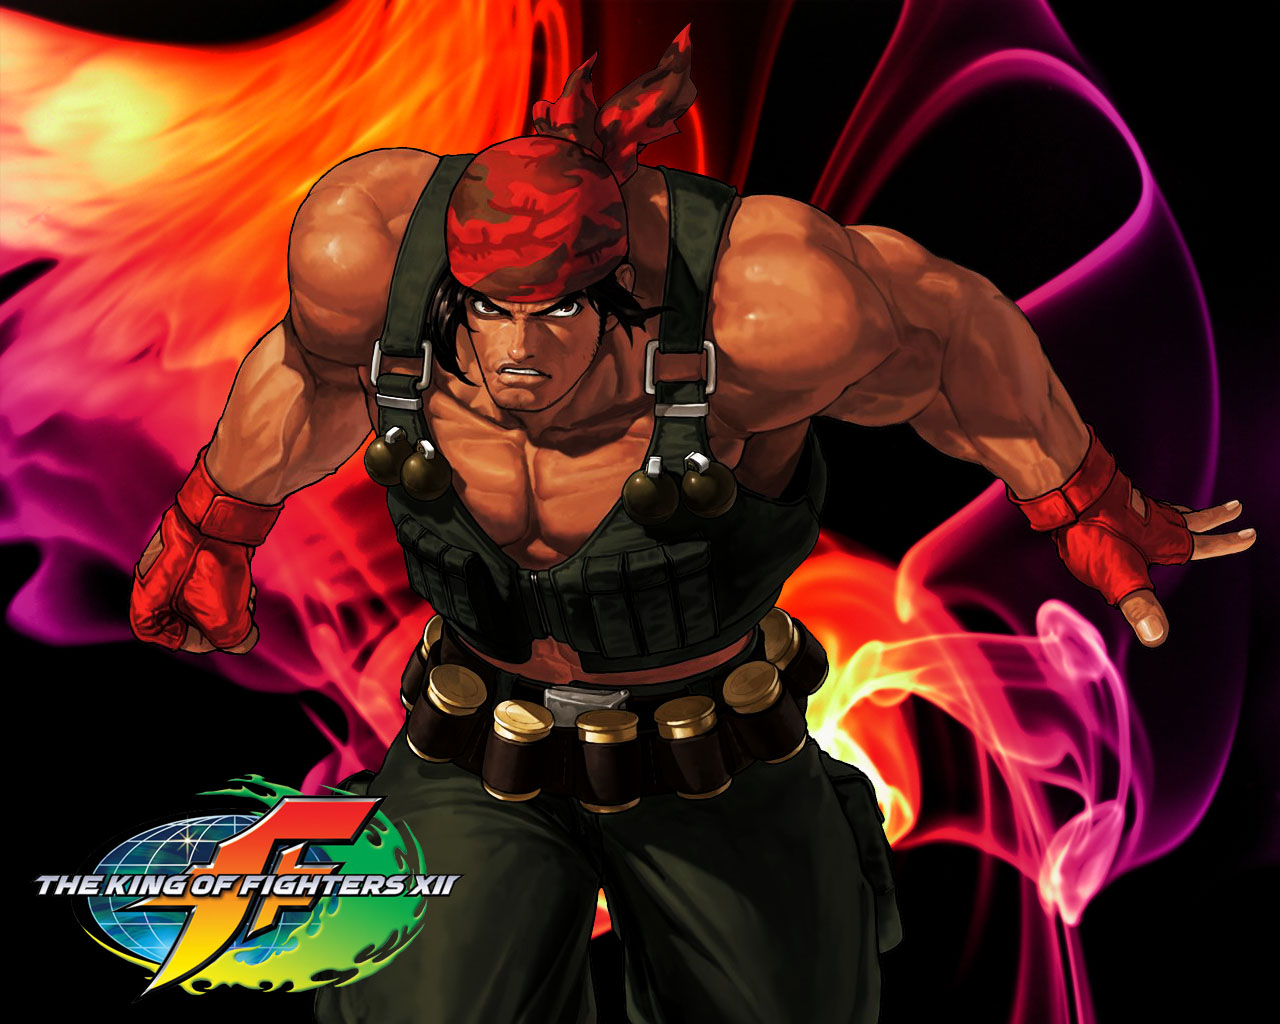 HD wallpaper: The King Of Fighters XII, The King of Fighter wallpaper,  Games